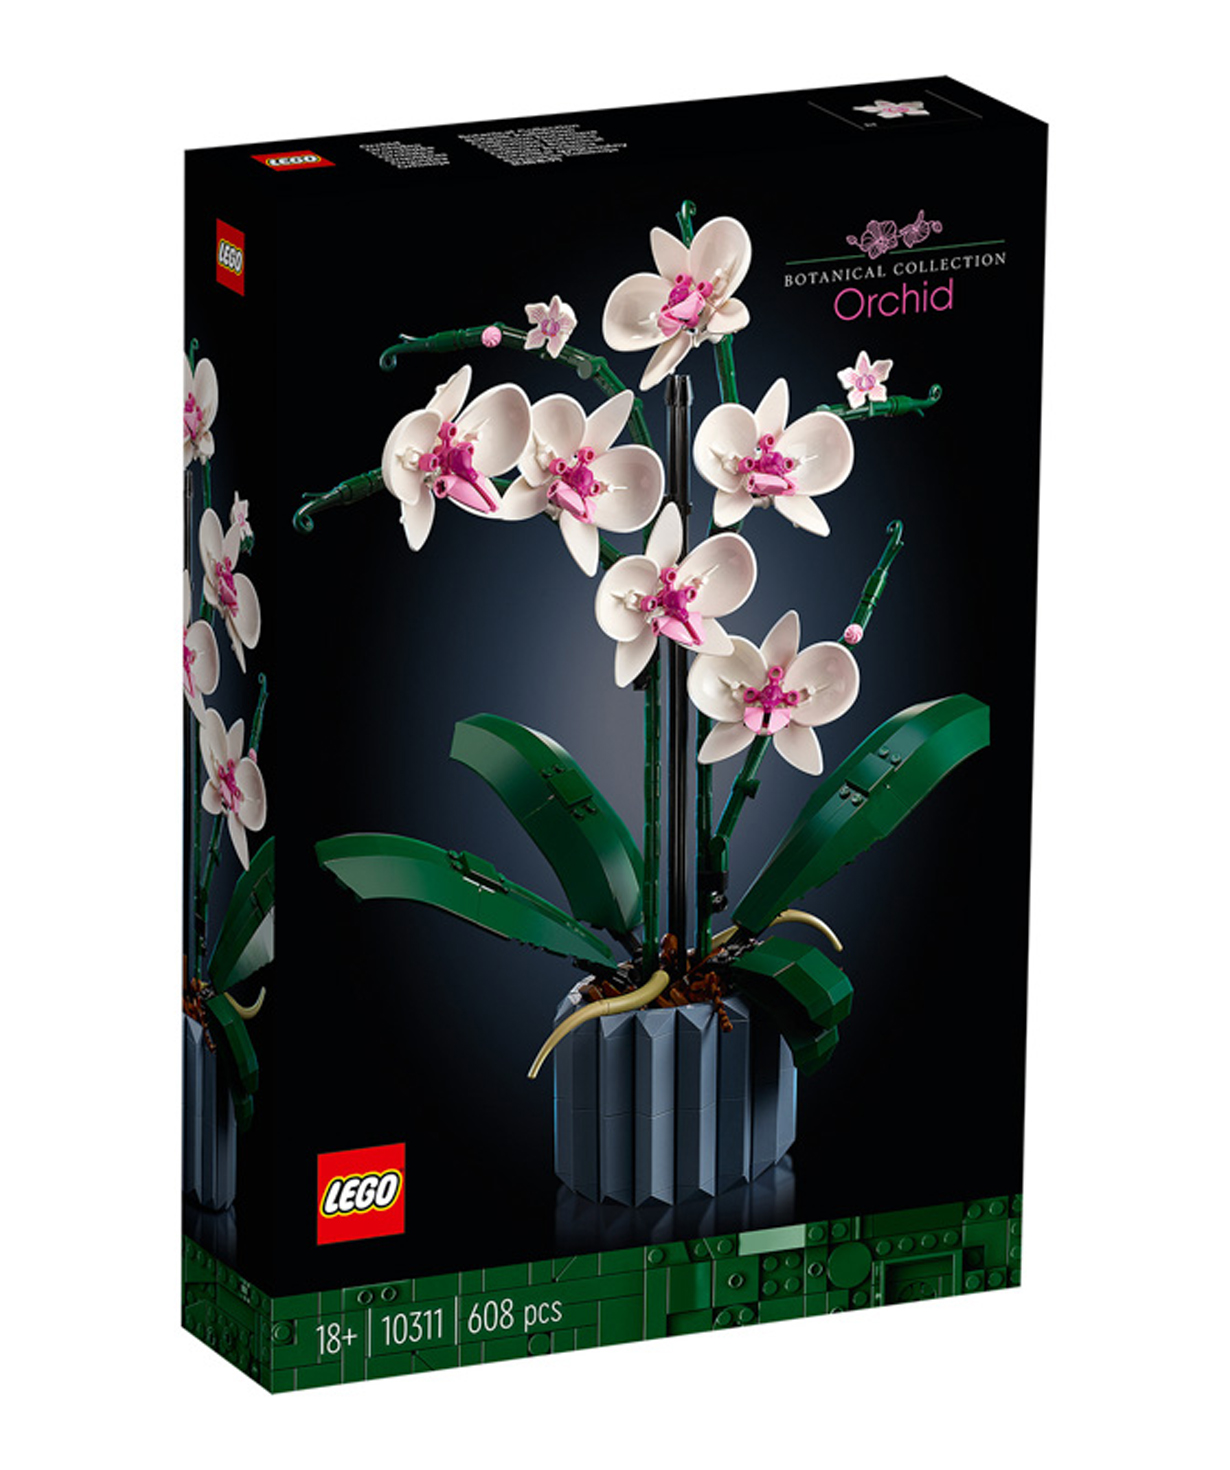 Constructor LEGO Icons Orchid Botanical collection